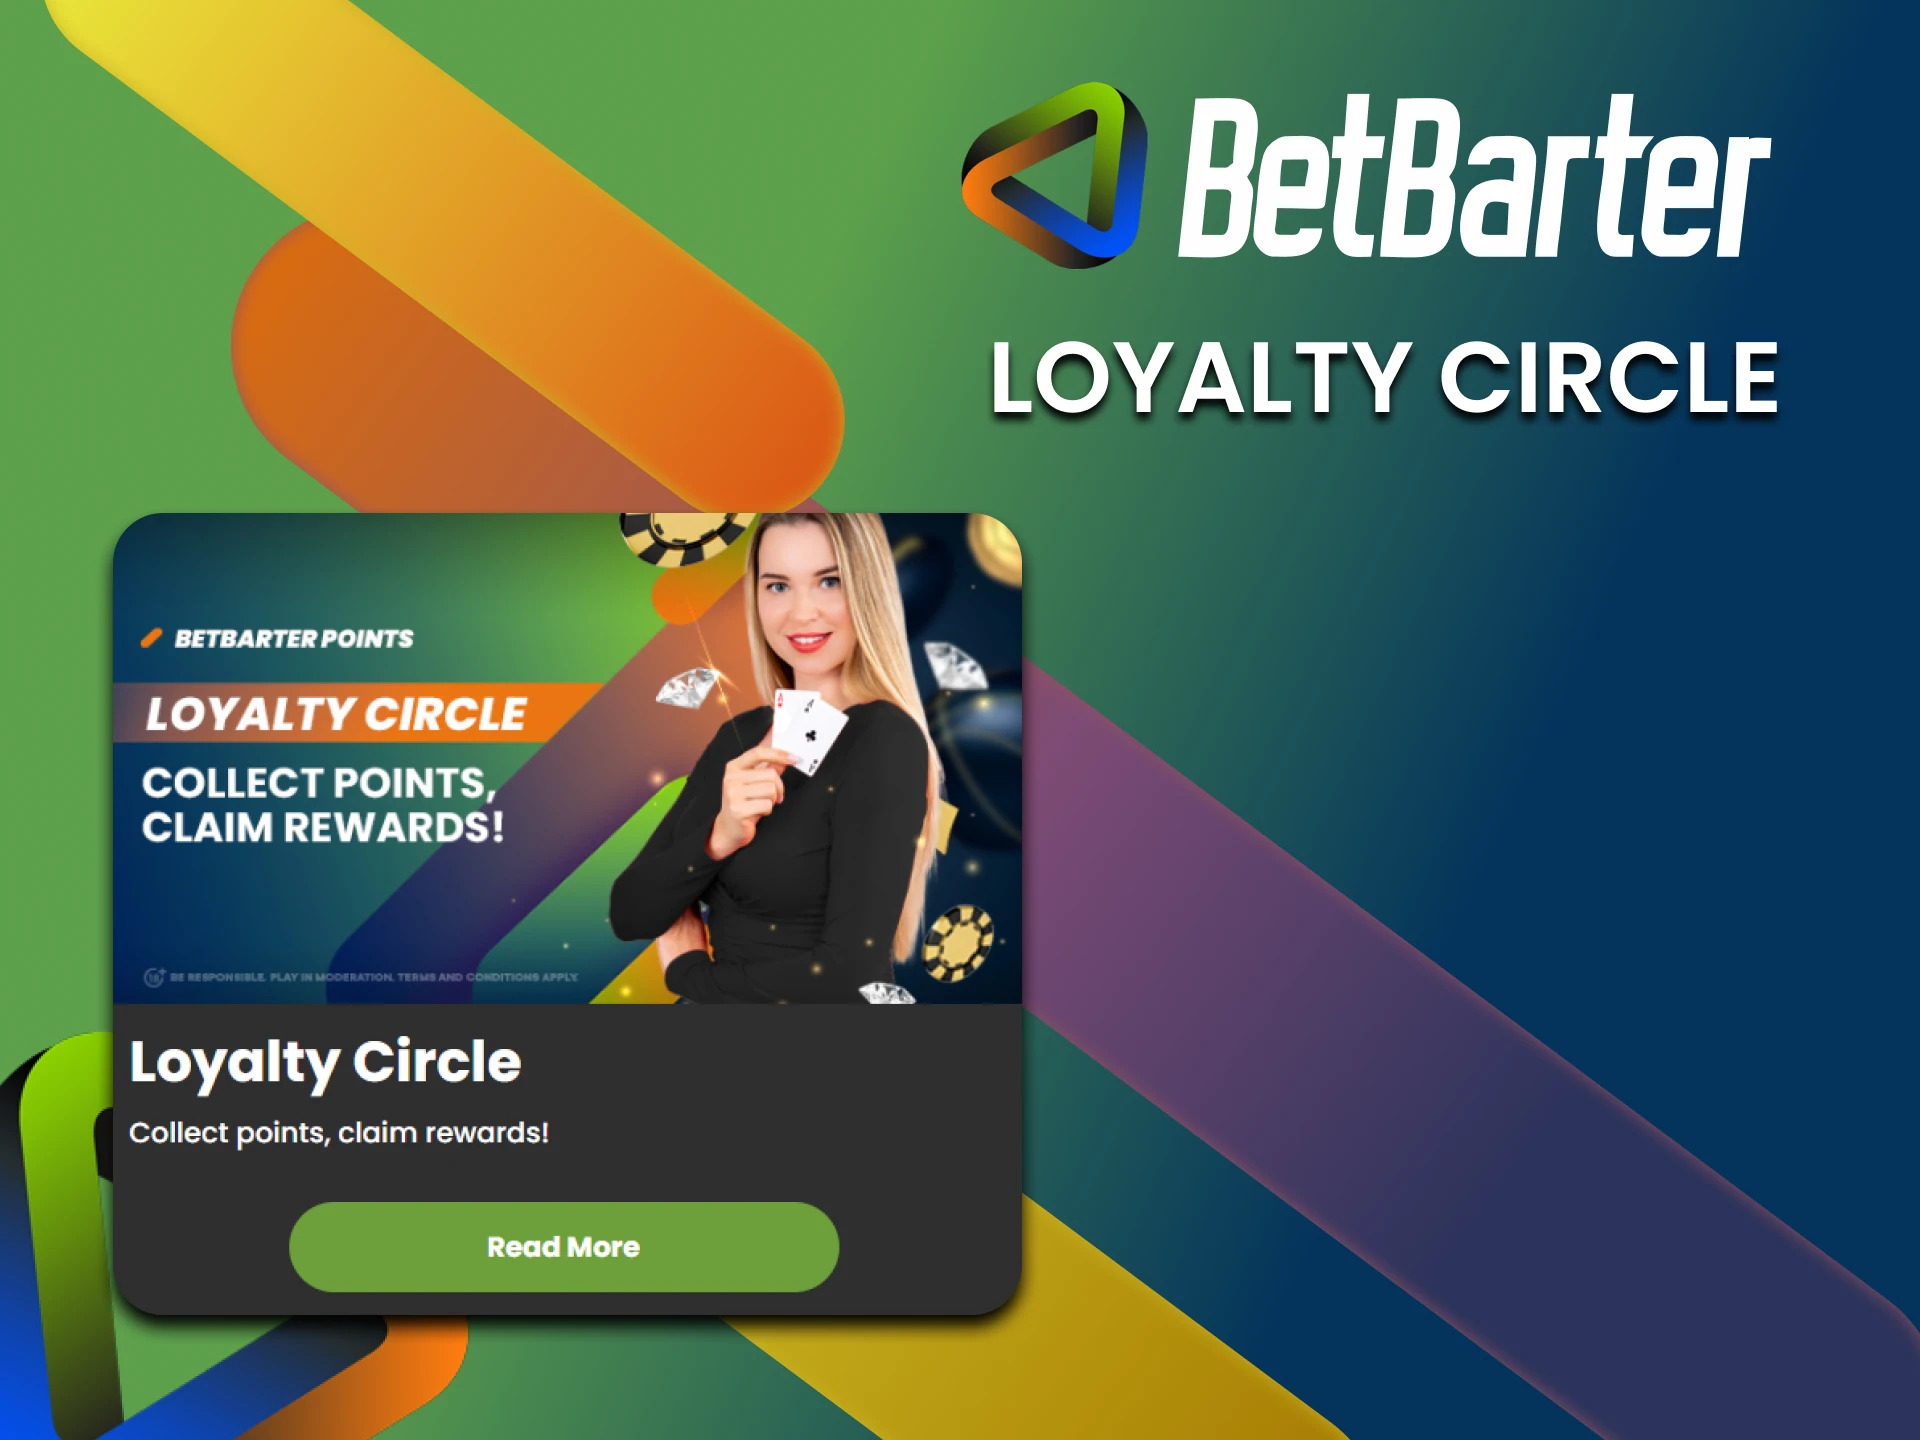 Users from India can get generous bonuses as a loyalty to BetBarter app.